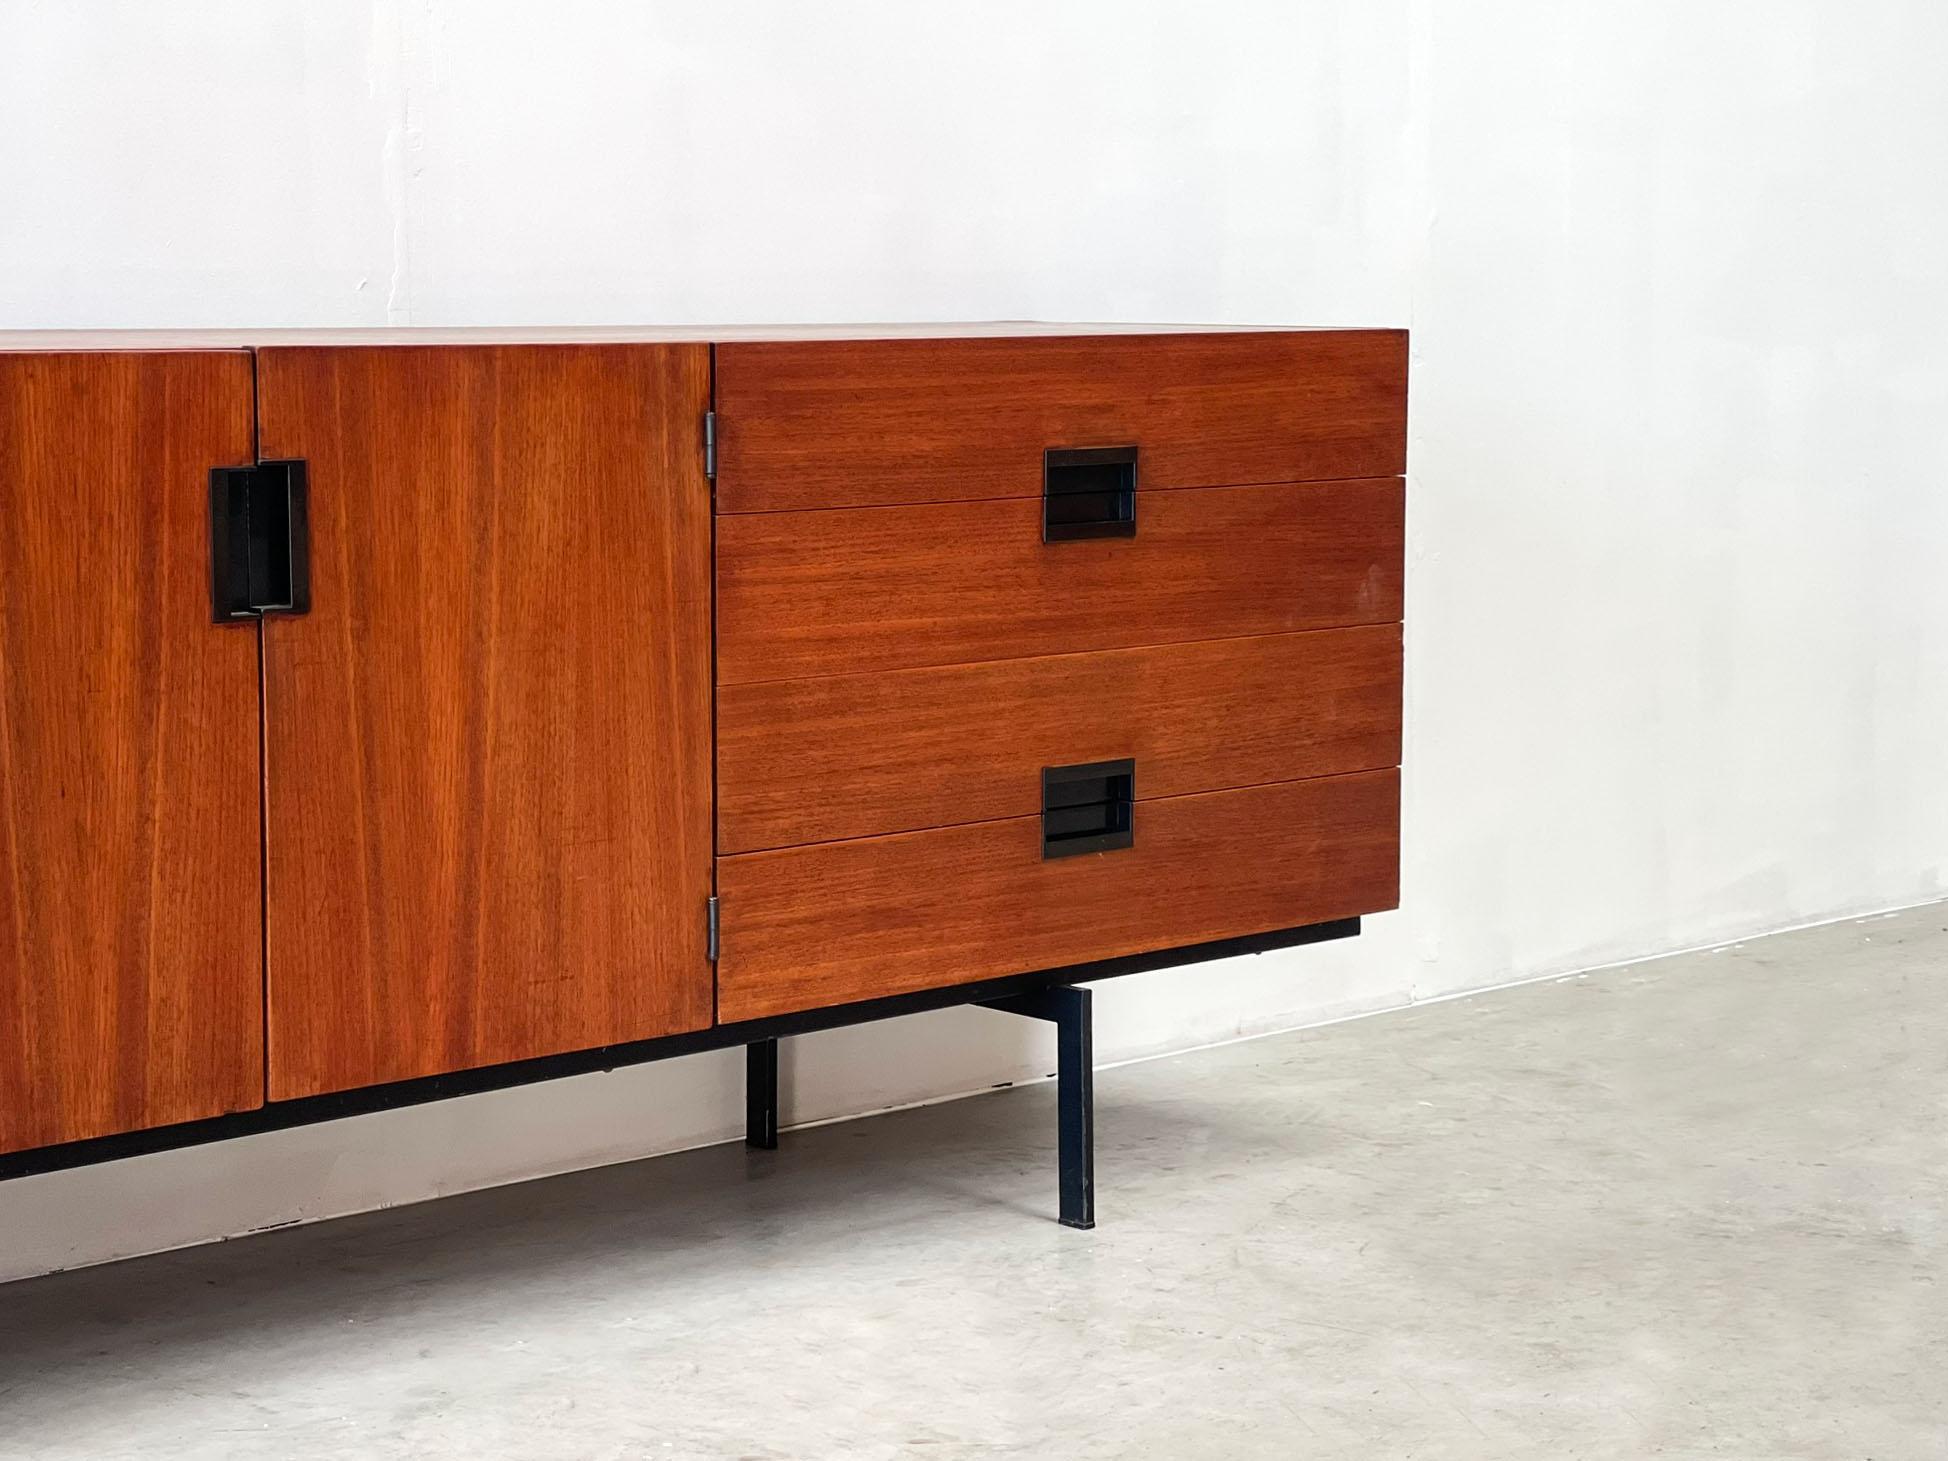 Pastoe DU03 sideboard by Cees Braakman
A true Dutch design icon.

The DU03 is one of Pastoe's best known but also most desirable sideboards. Cees Braakman designed this sideboard in the late 60s.

The sideboard has a very nice veneer with a